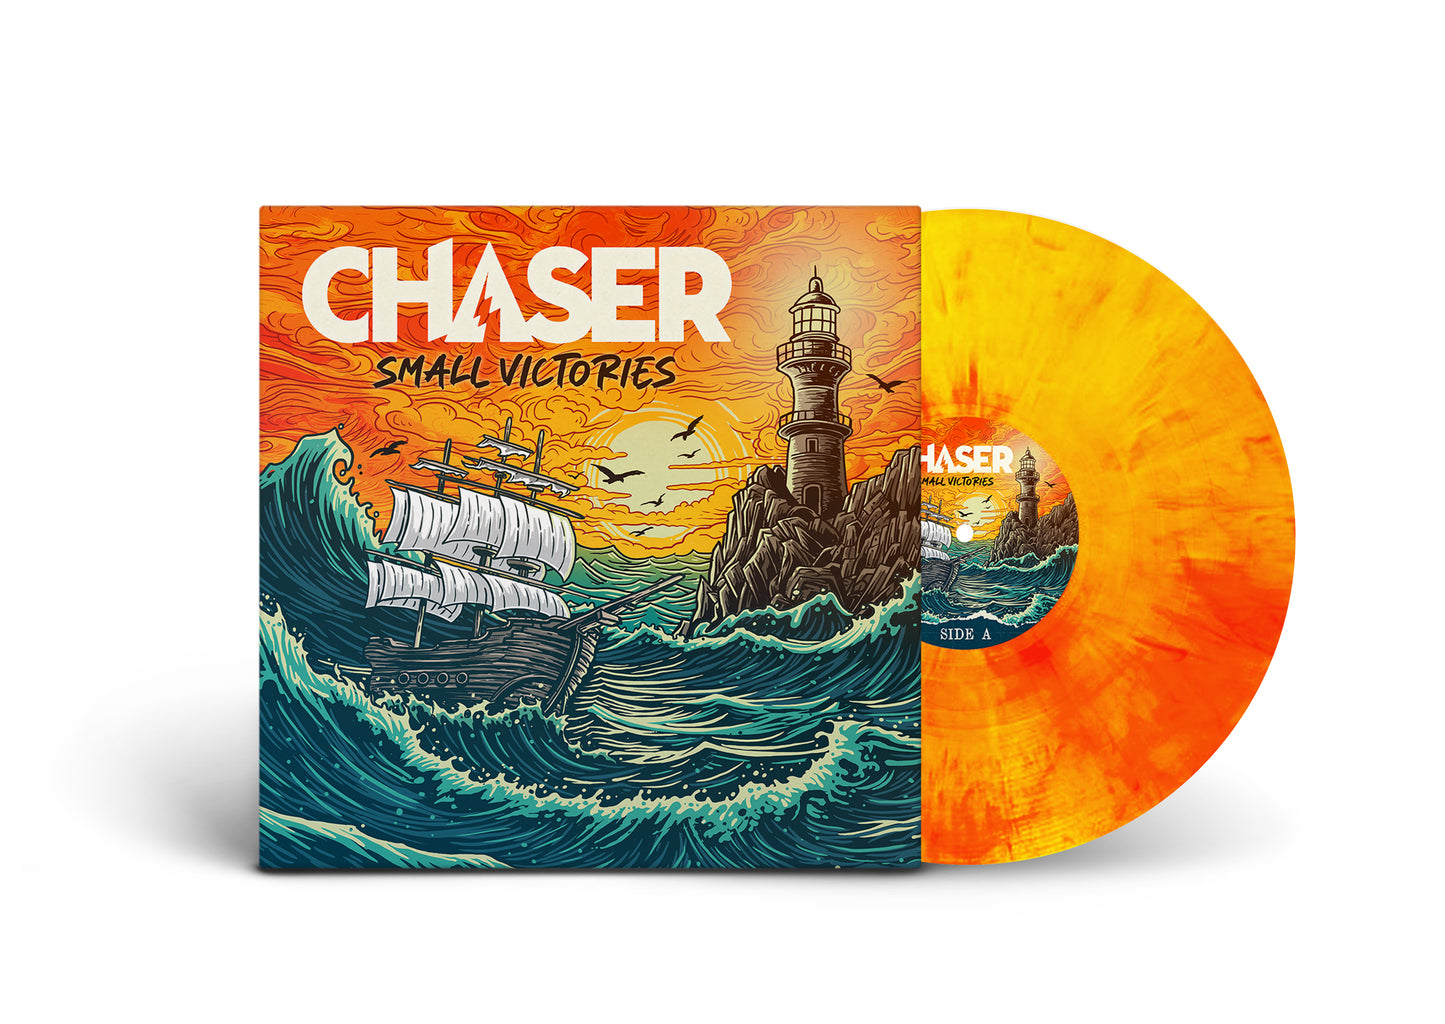 CHASER - "Small Victories" (SBAM) (LP/CD)